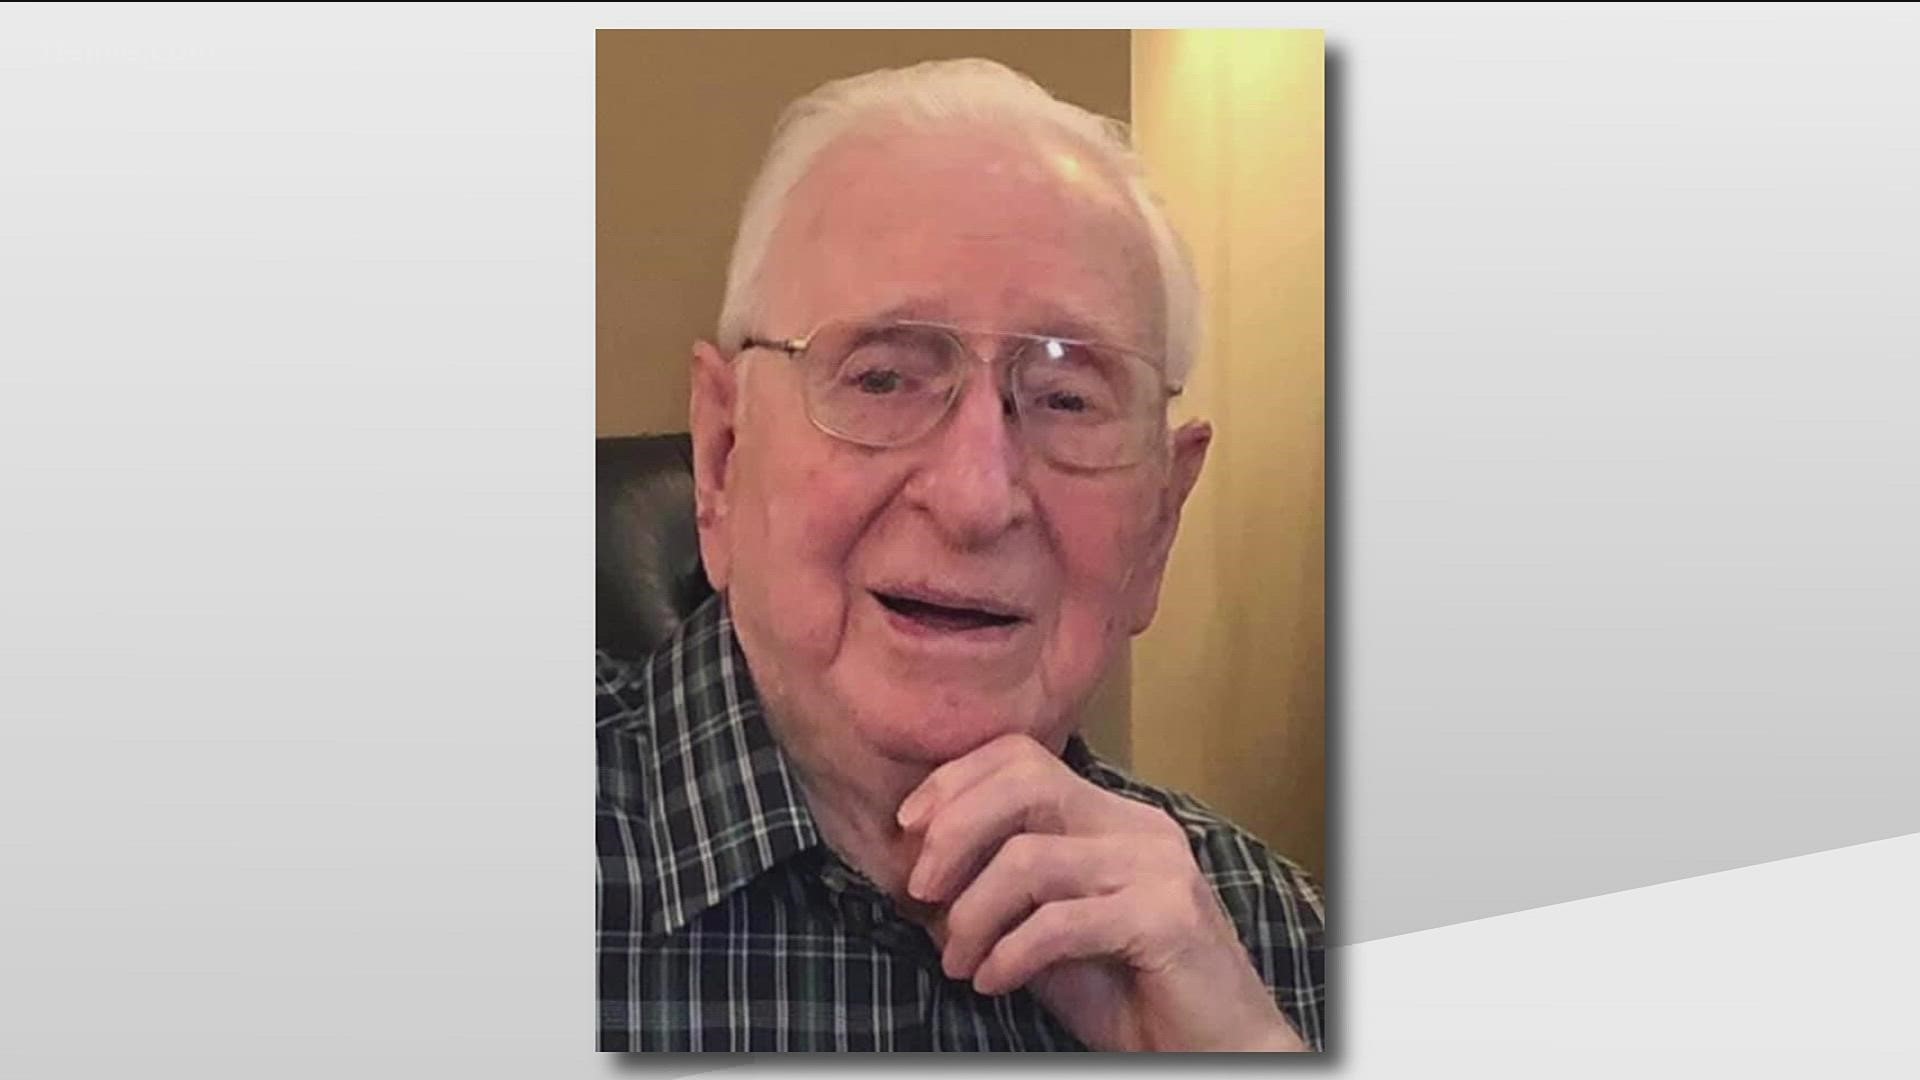 Herbert Brimer turned 105 back in July and spoke to 11Alive Anchor Jeff Hullinger about his vast collection of Atlanta memories.